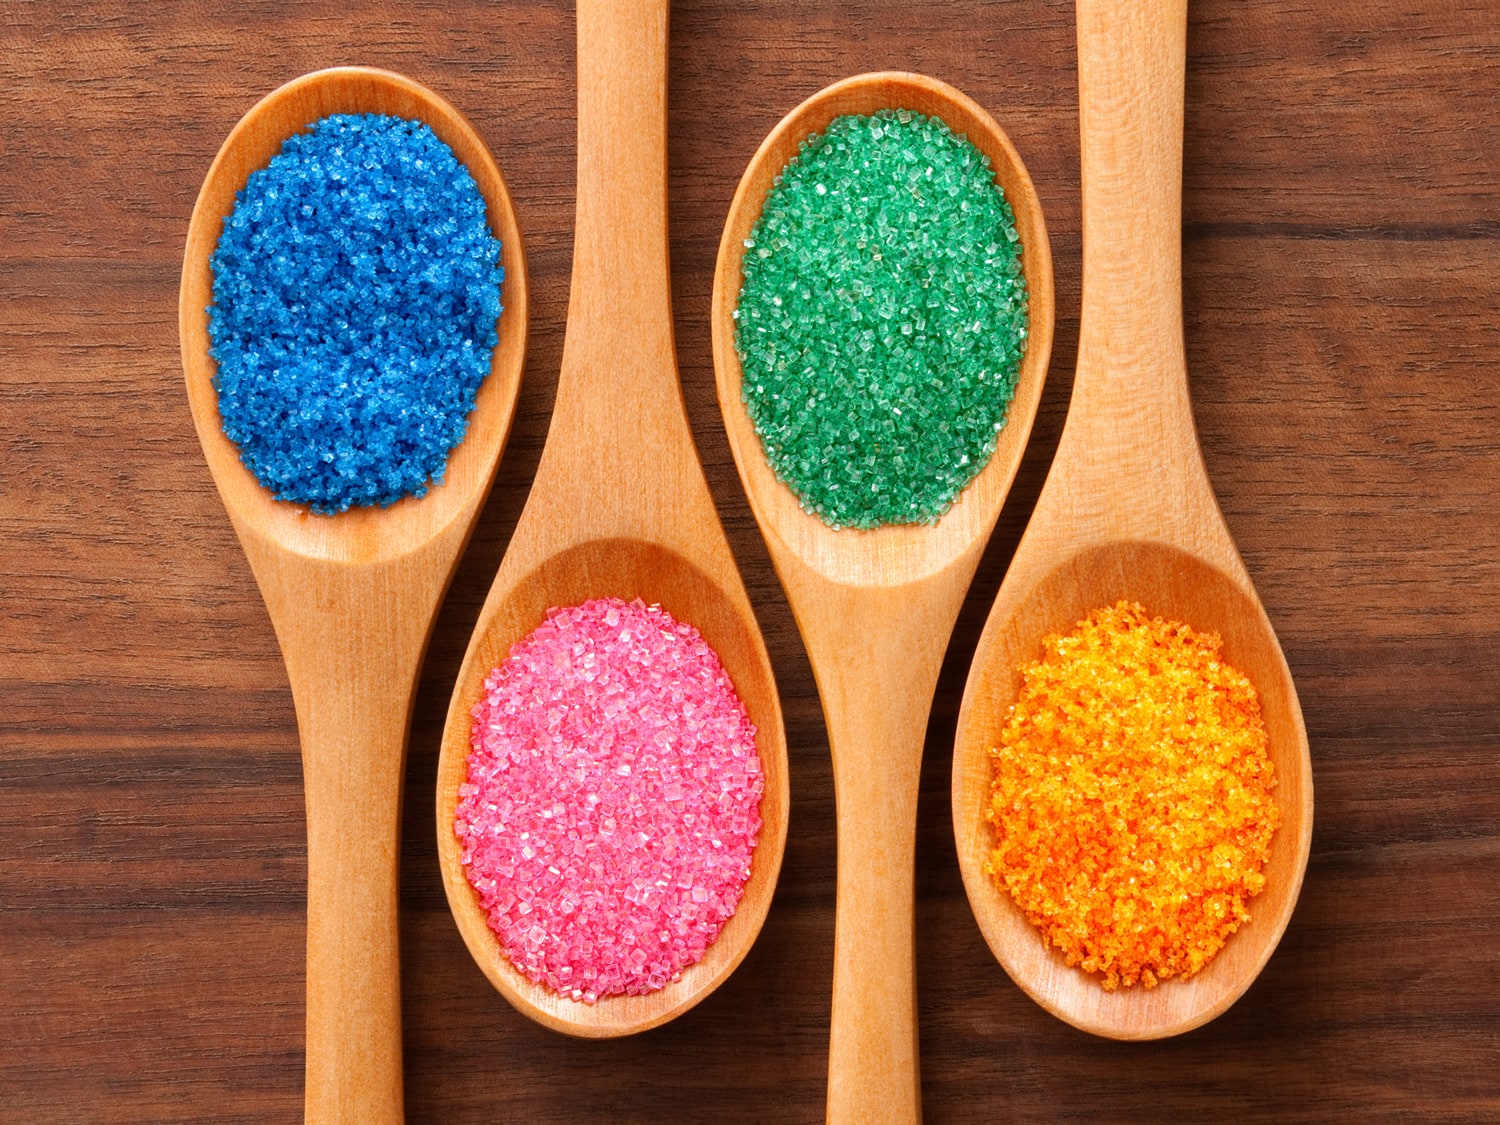 Four spoons with colored sugars